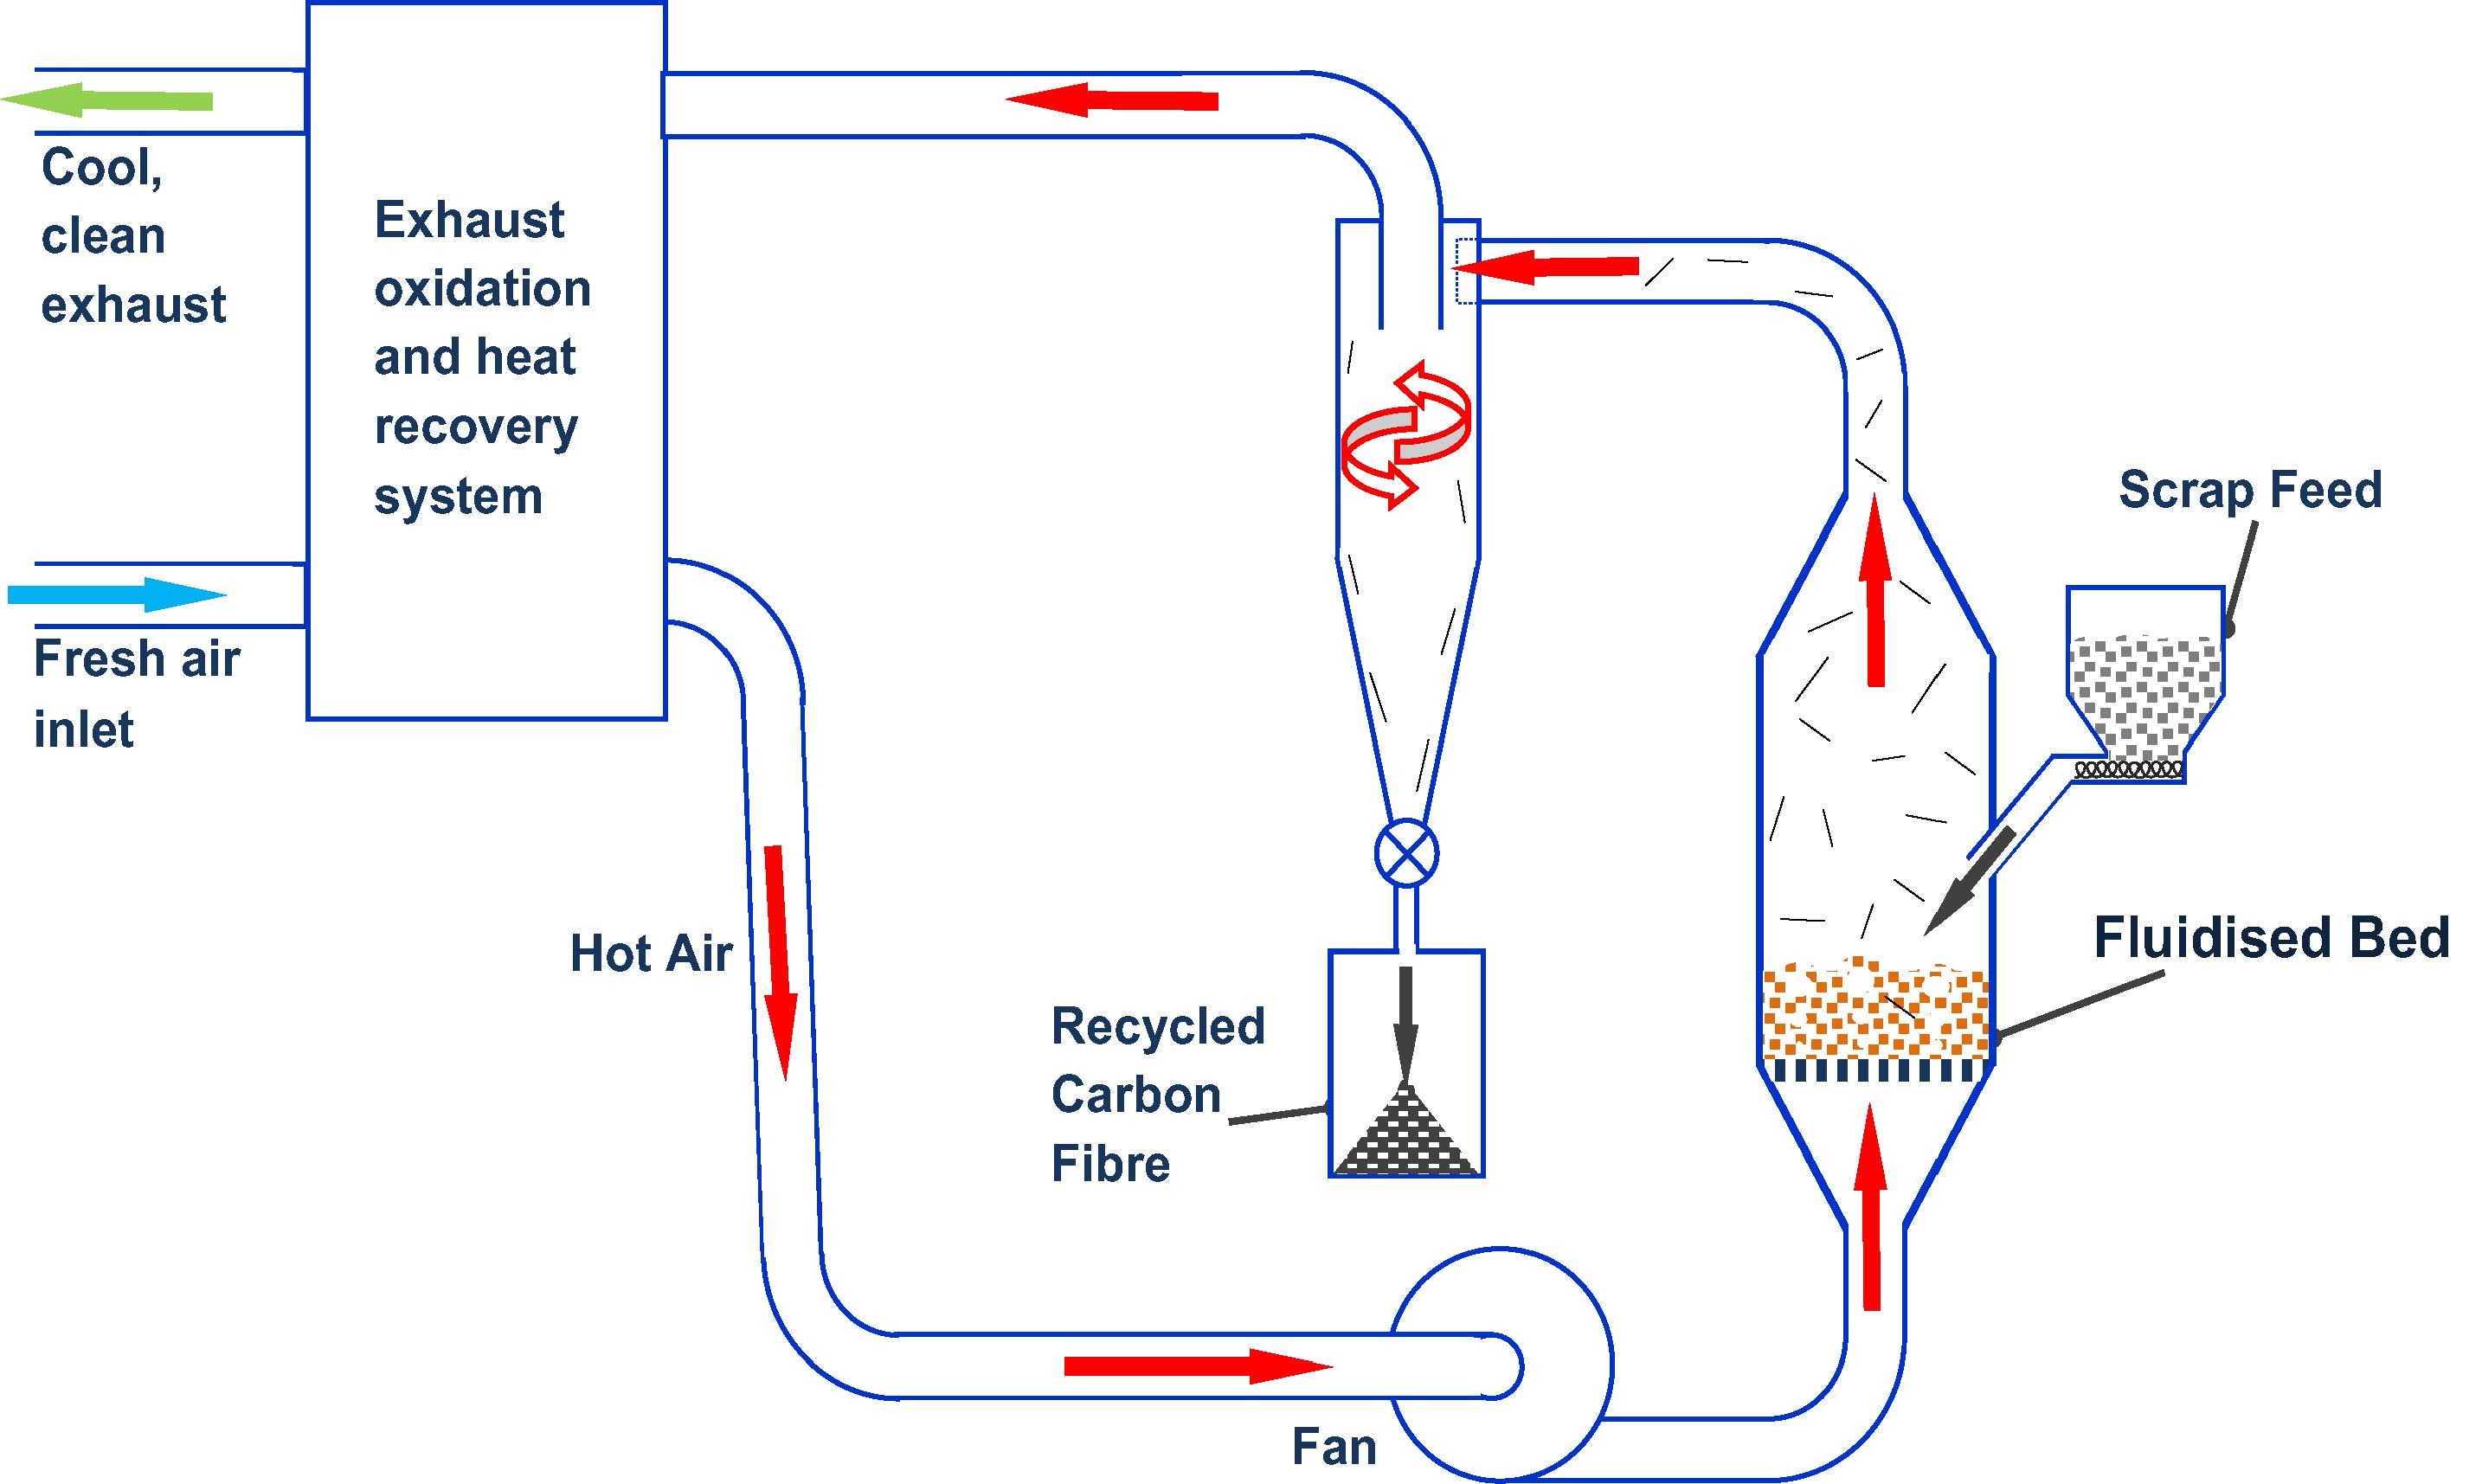 Main components of fluidized bed CFRP recycling process. From [2].